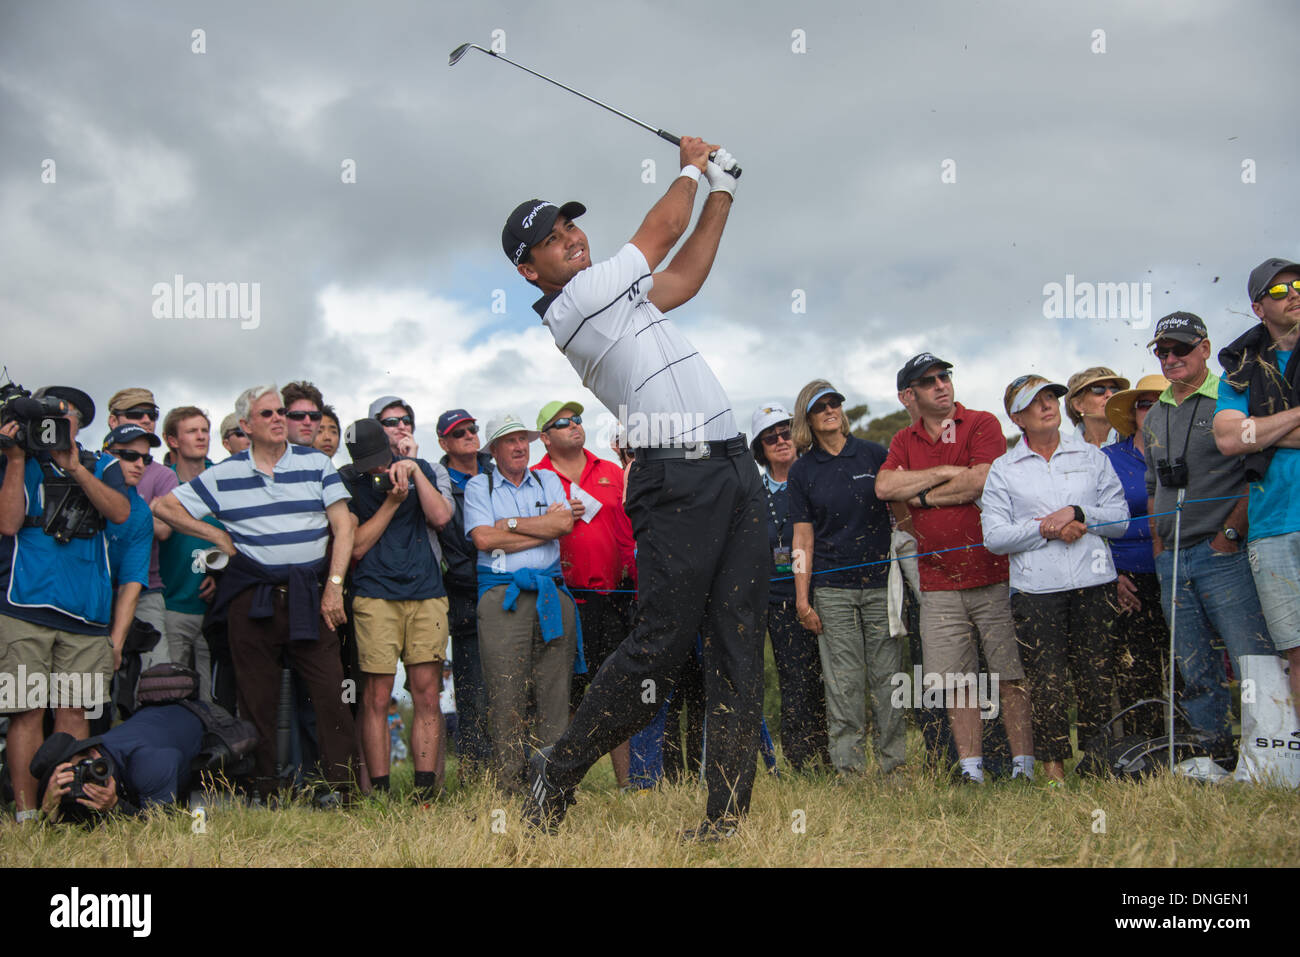 Jason Day world Champion golfer Australia playing in the Handa World Cup 2013 Royal Melbourne portrait with spectators looking Stock Photo